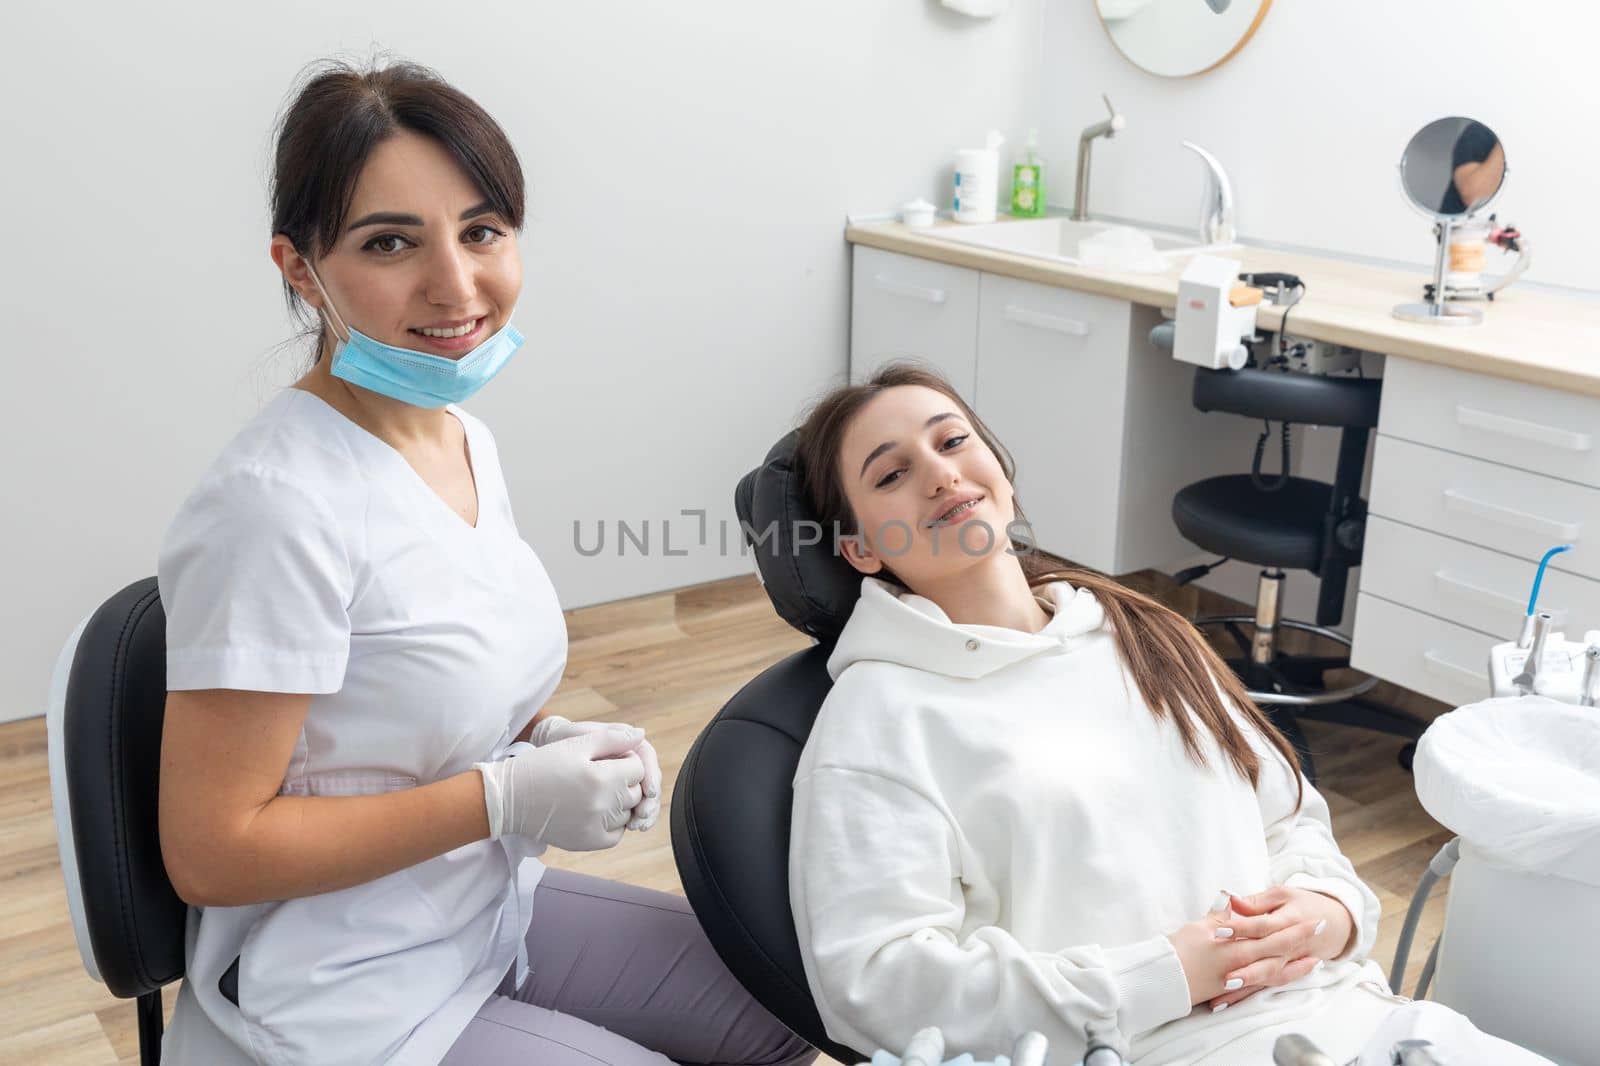 Orthodontist checking brackets on female teeth. Concept of stomatology, dentistry, orthodontic treatment of braces by Mariakray